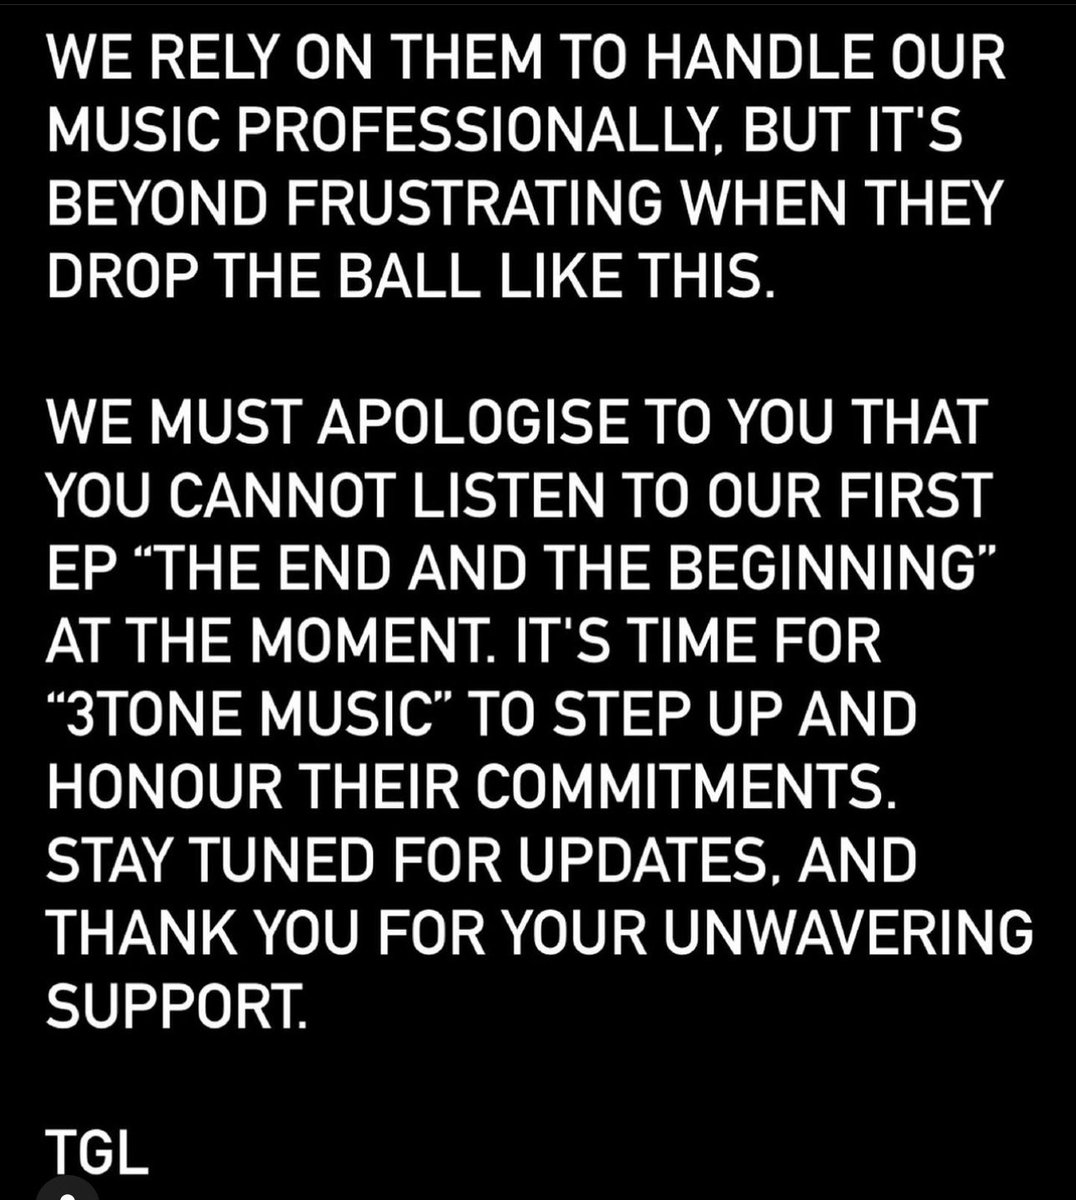 📢Please read📢
#TransparencyMatters
#ArtistsDeserveBetter
#holdthemaccountable
#supportnewmusic
#support
#3tone